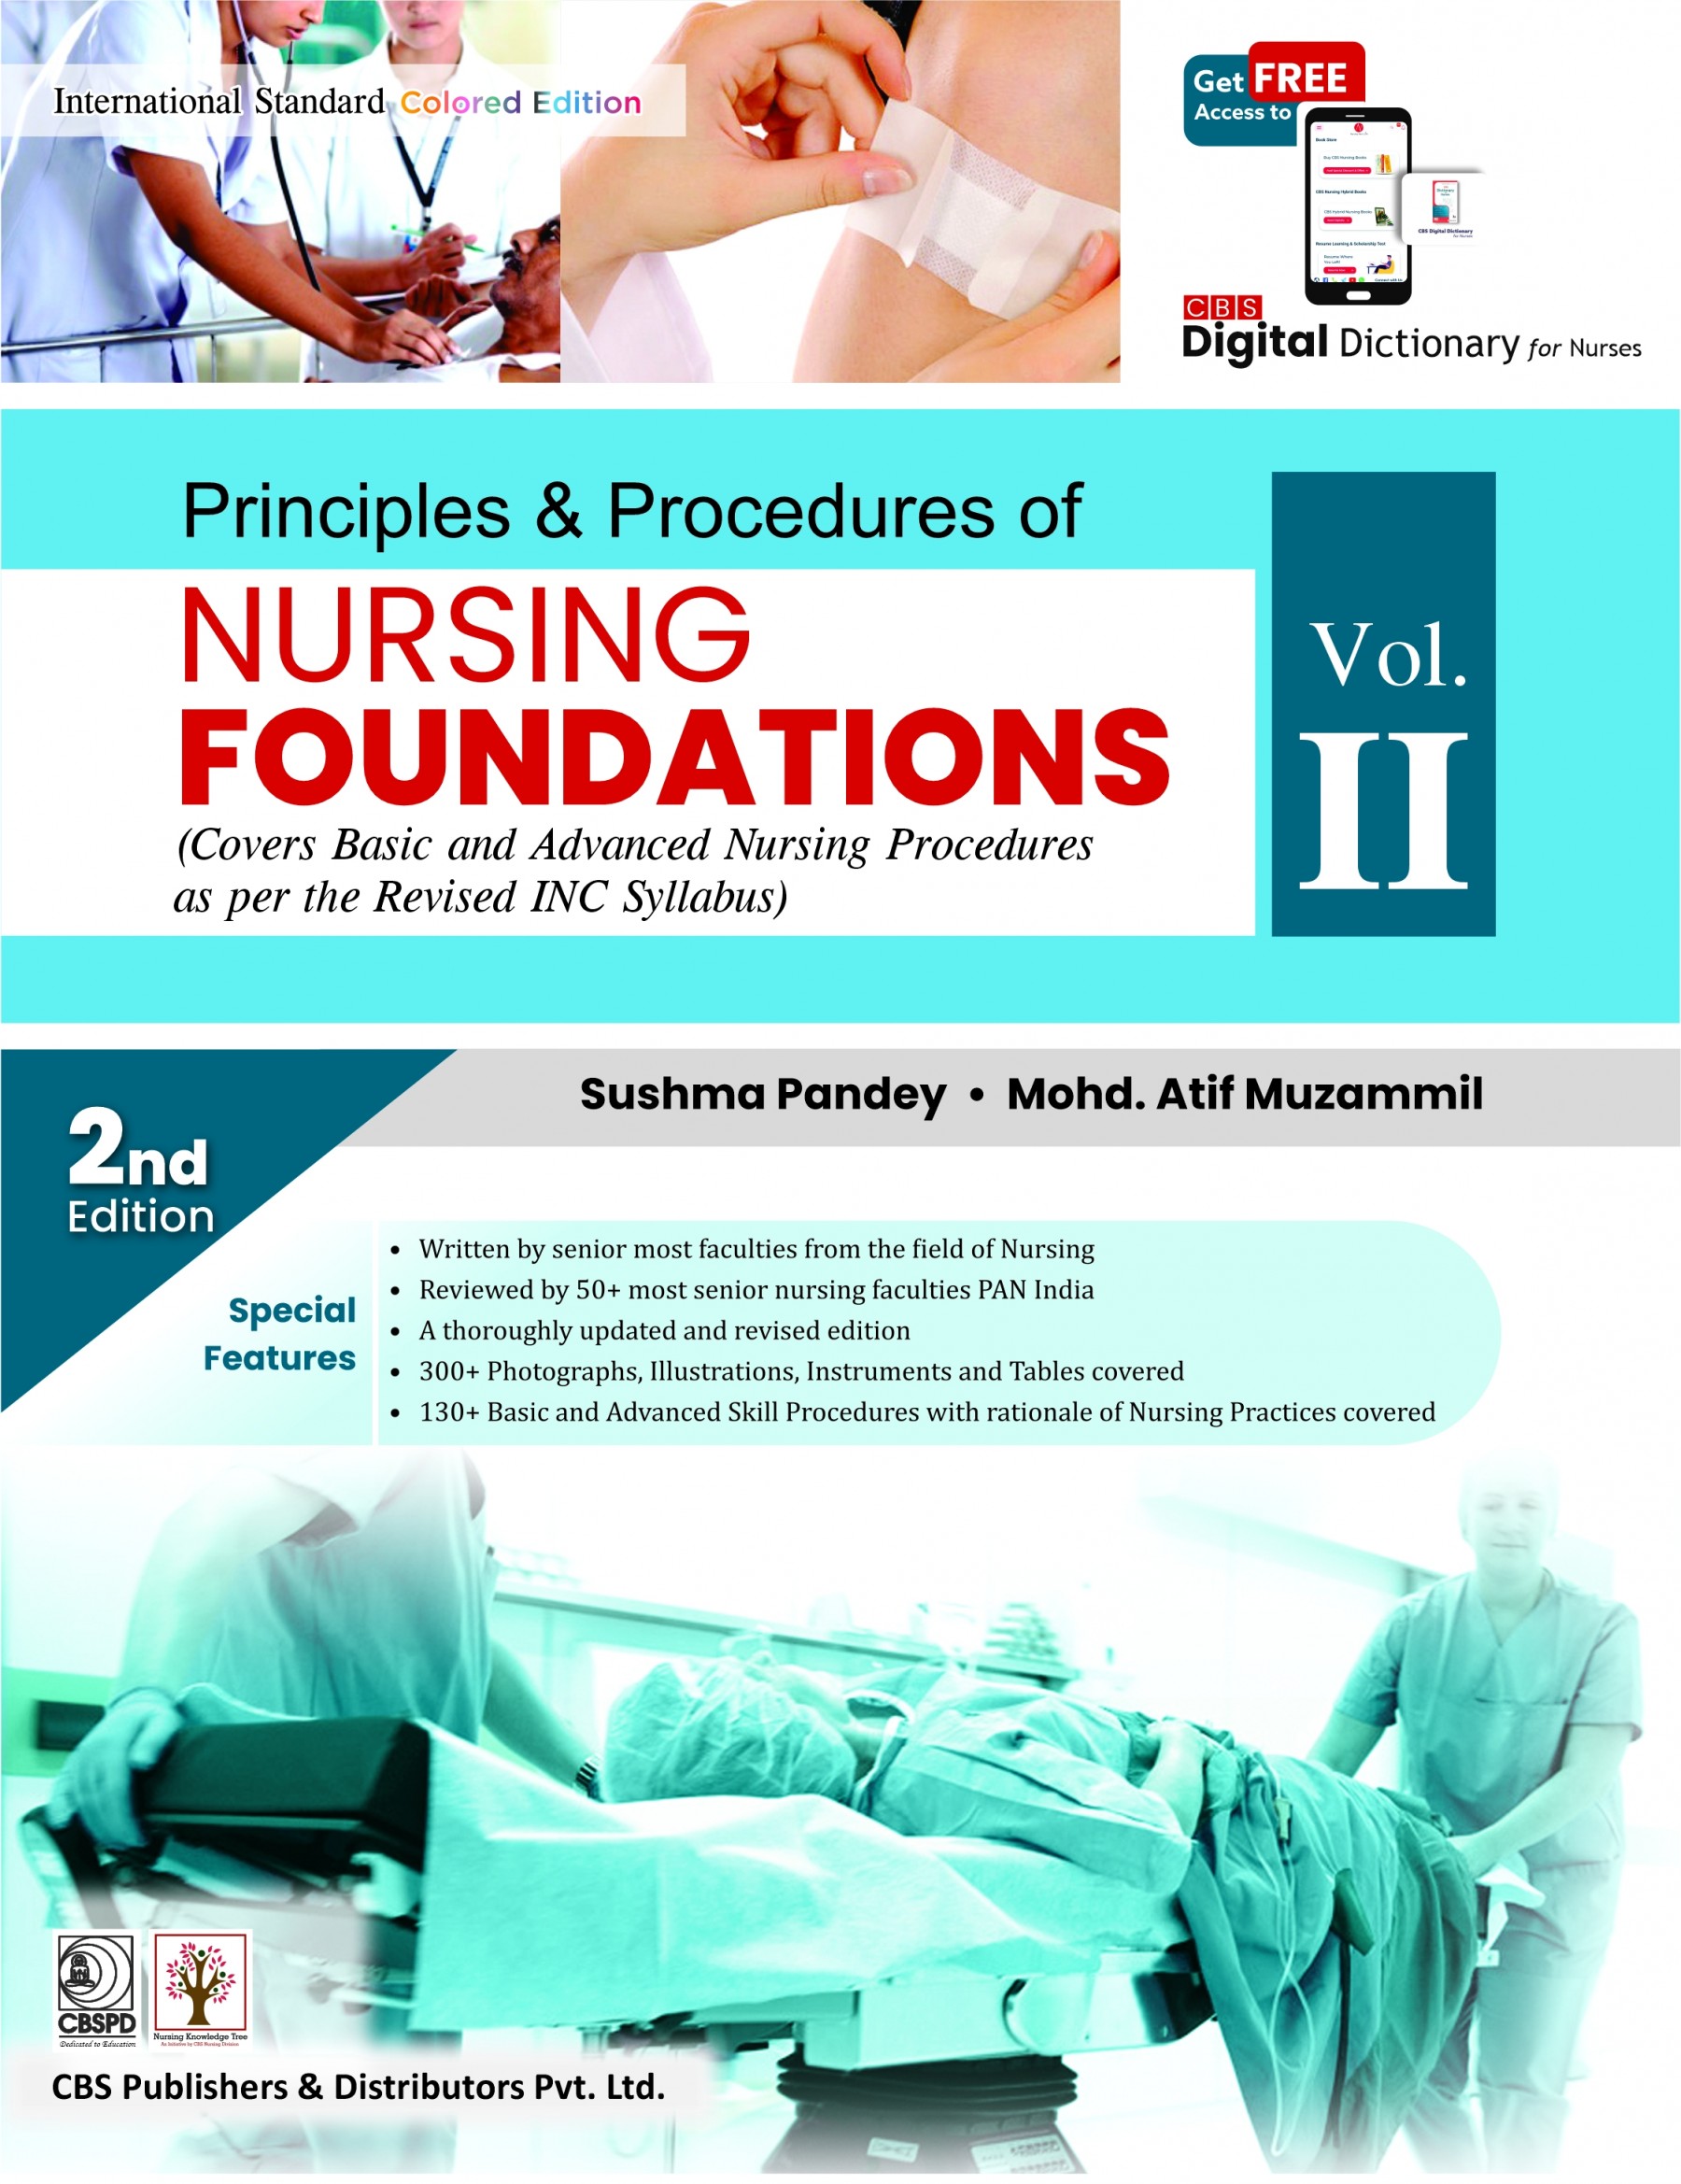 Principles & Procedures of Nursing Foundations vol 2 (covers theory part as per the revised inc syllabus)